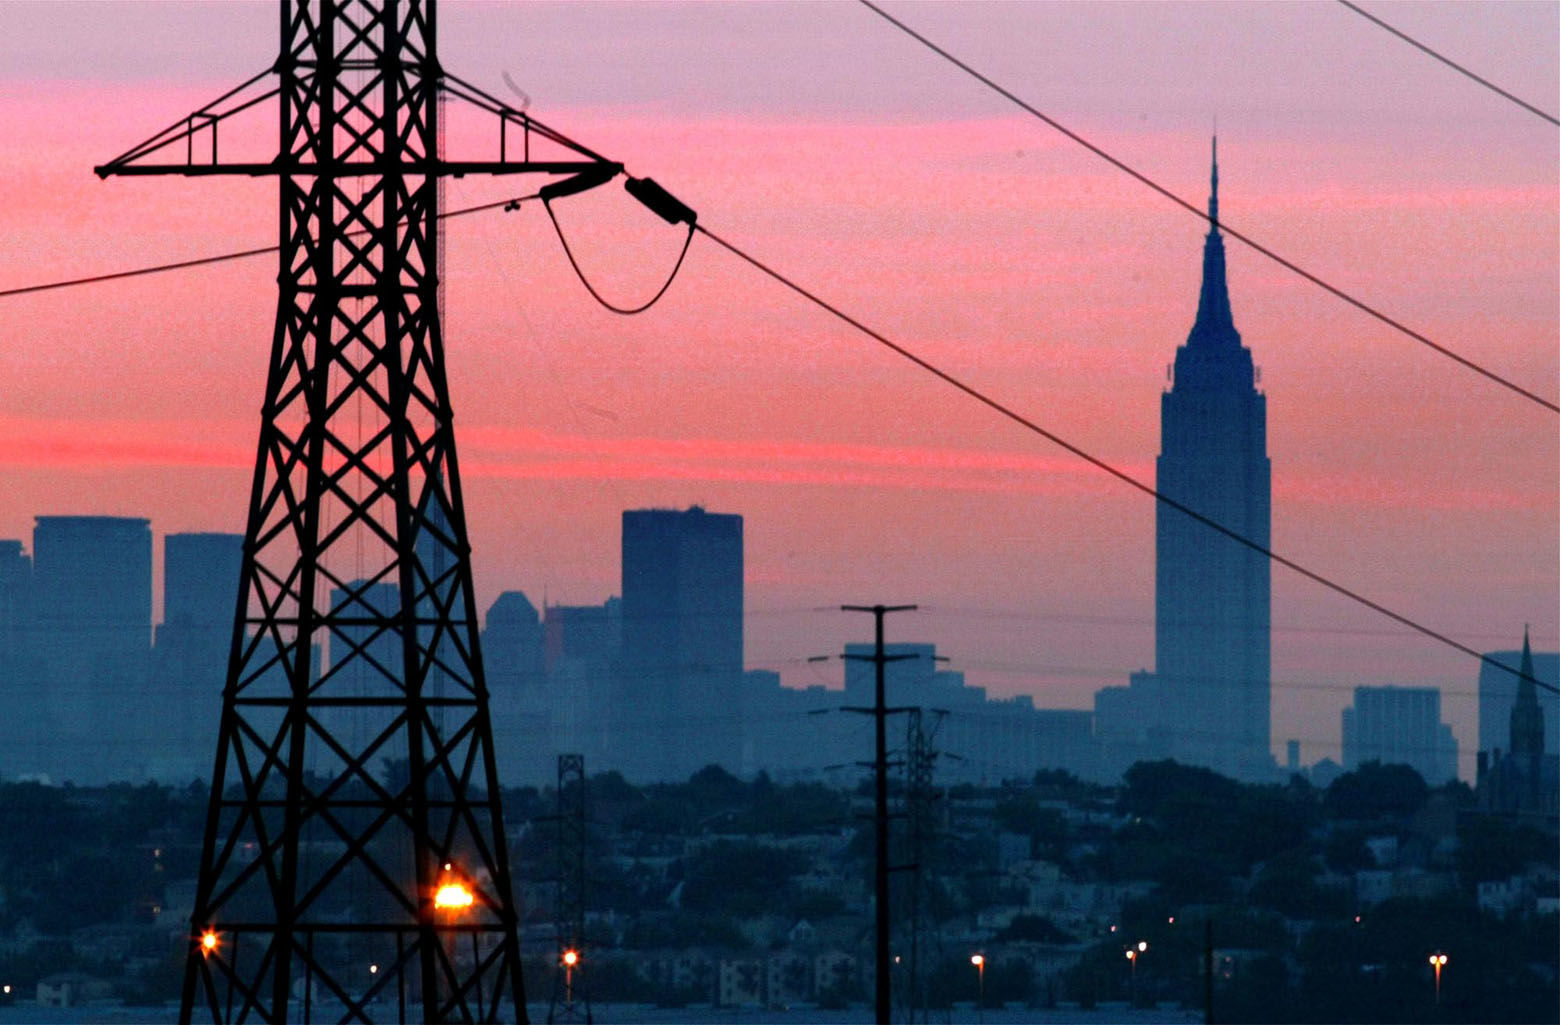 A darkened New York City is visible just before dawn through power lines from Jersey City, N.J., shown in foreground, with some lights visible, Friday, Aug. 15, 2003. The Empire State Building is in background.  (AP Photo/George Widman)